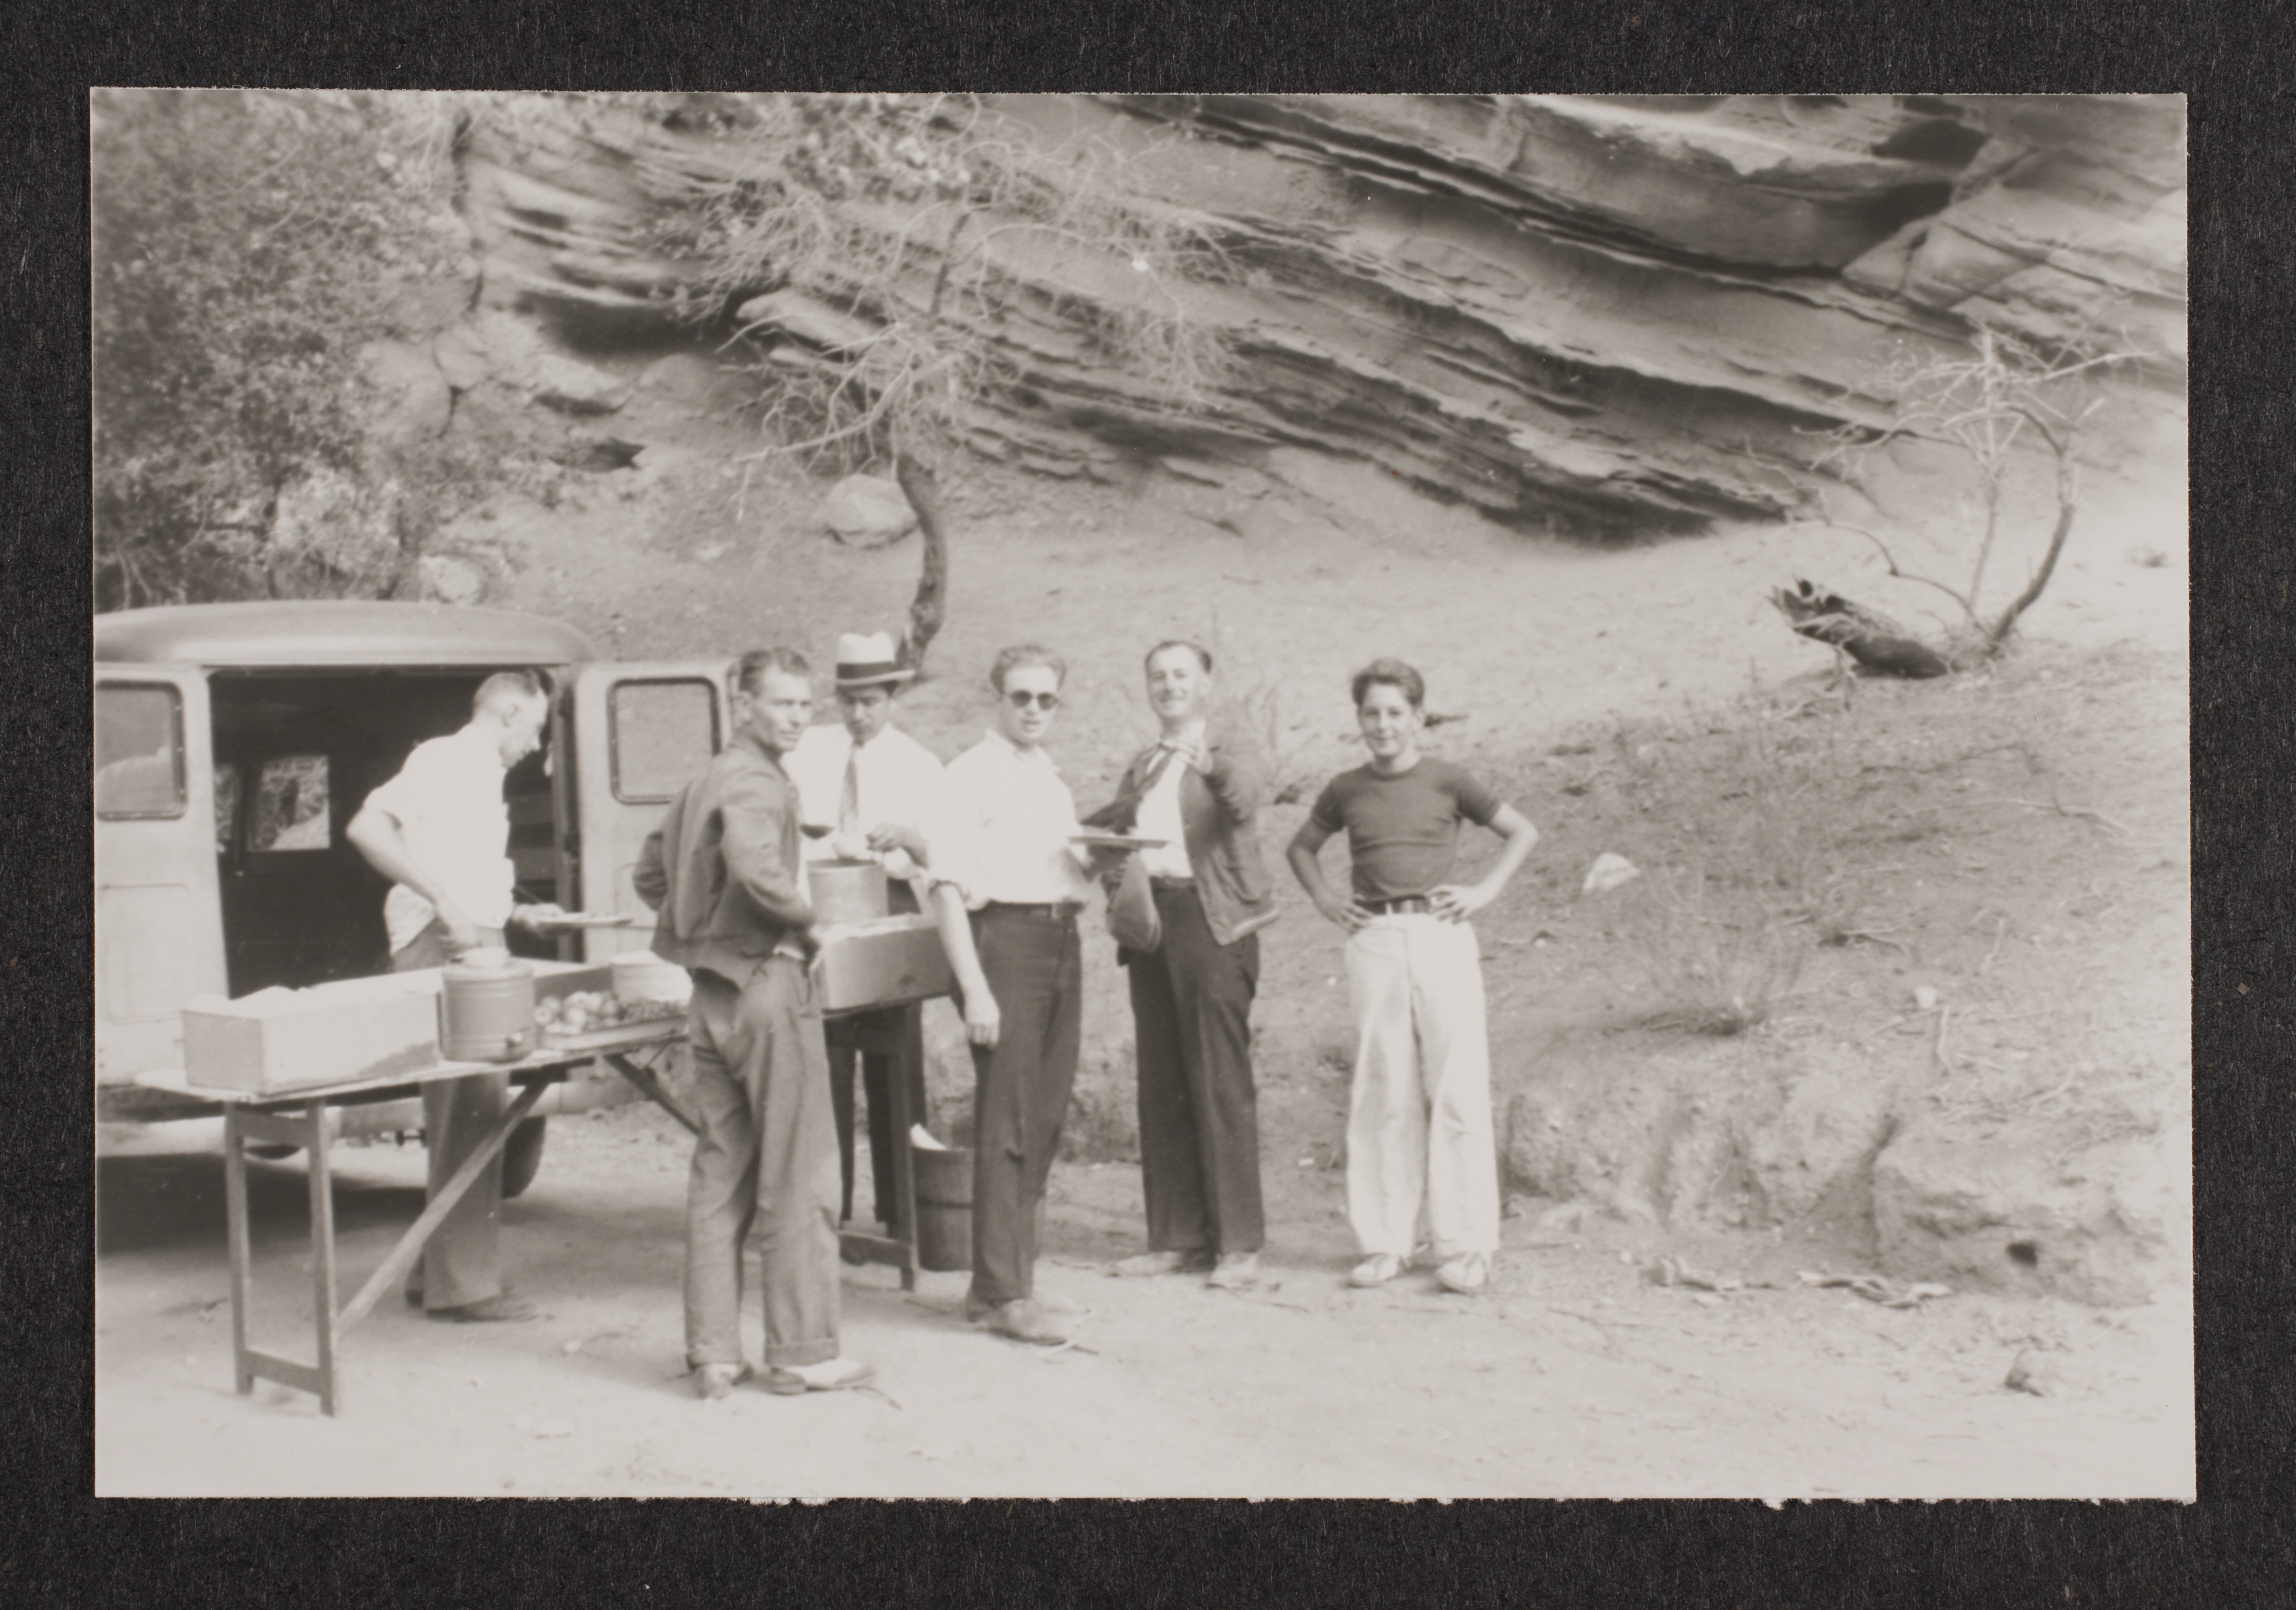 Unidentified men outside at unknown location: photographic print